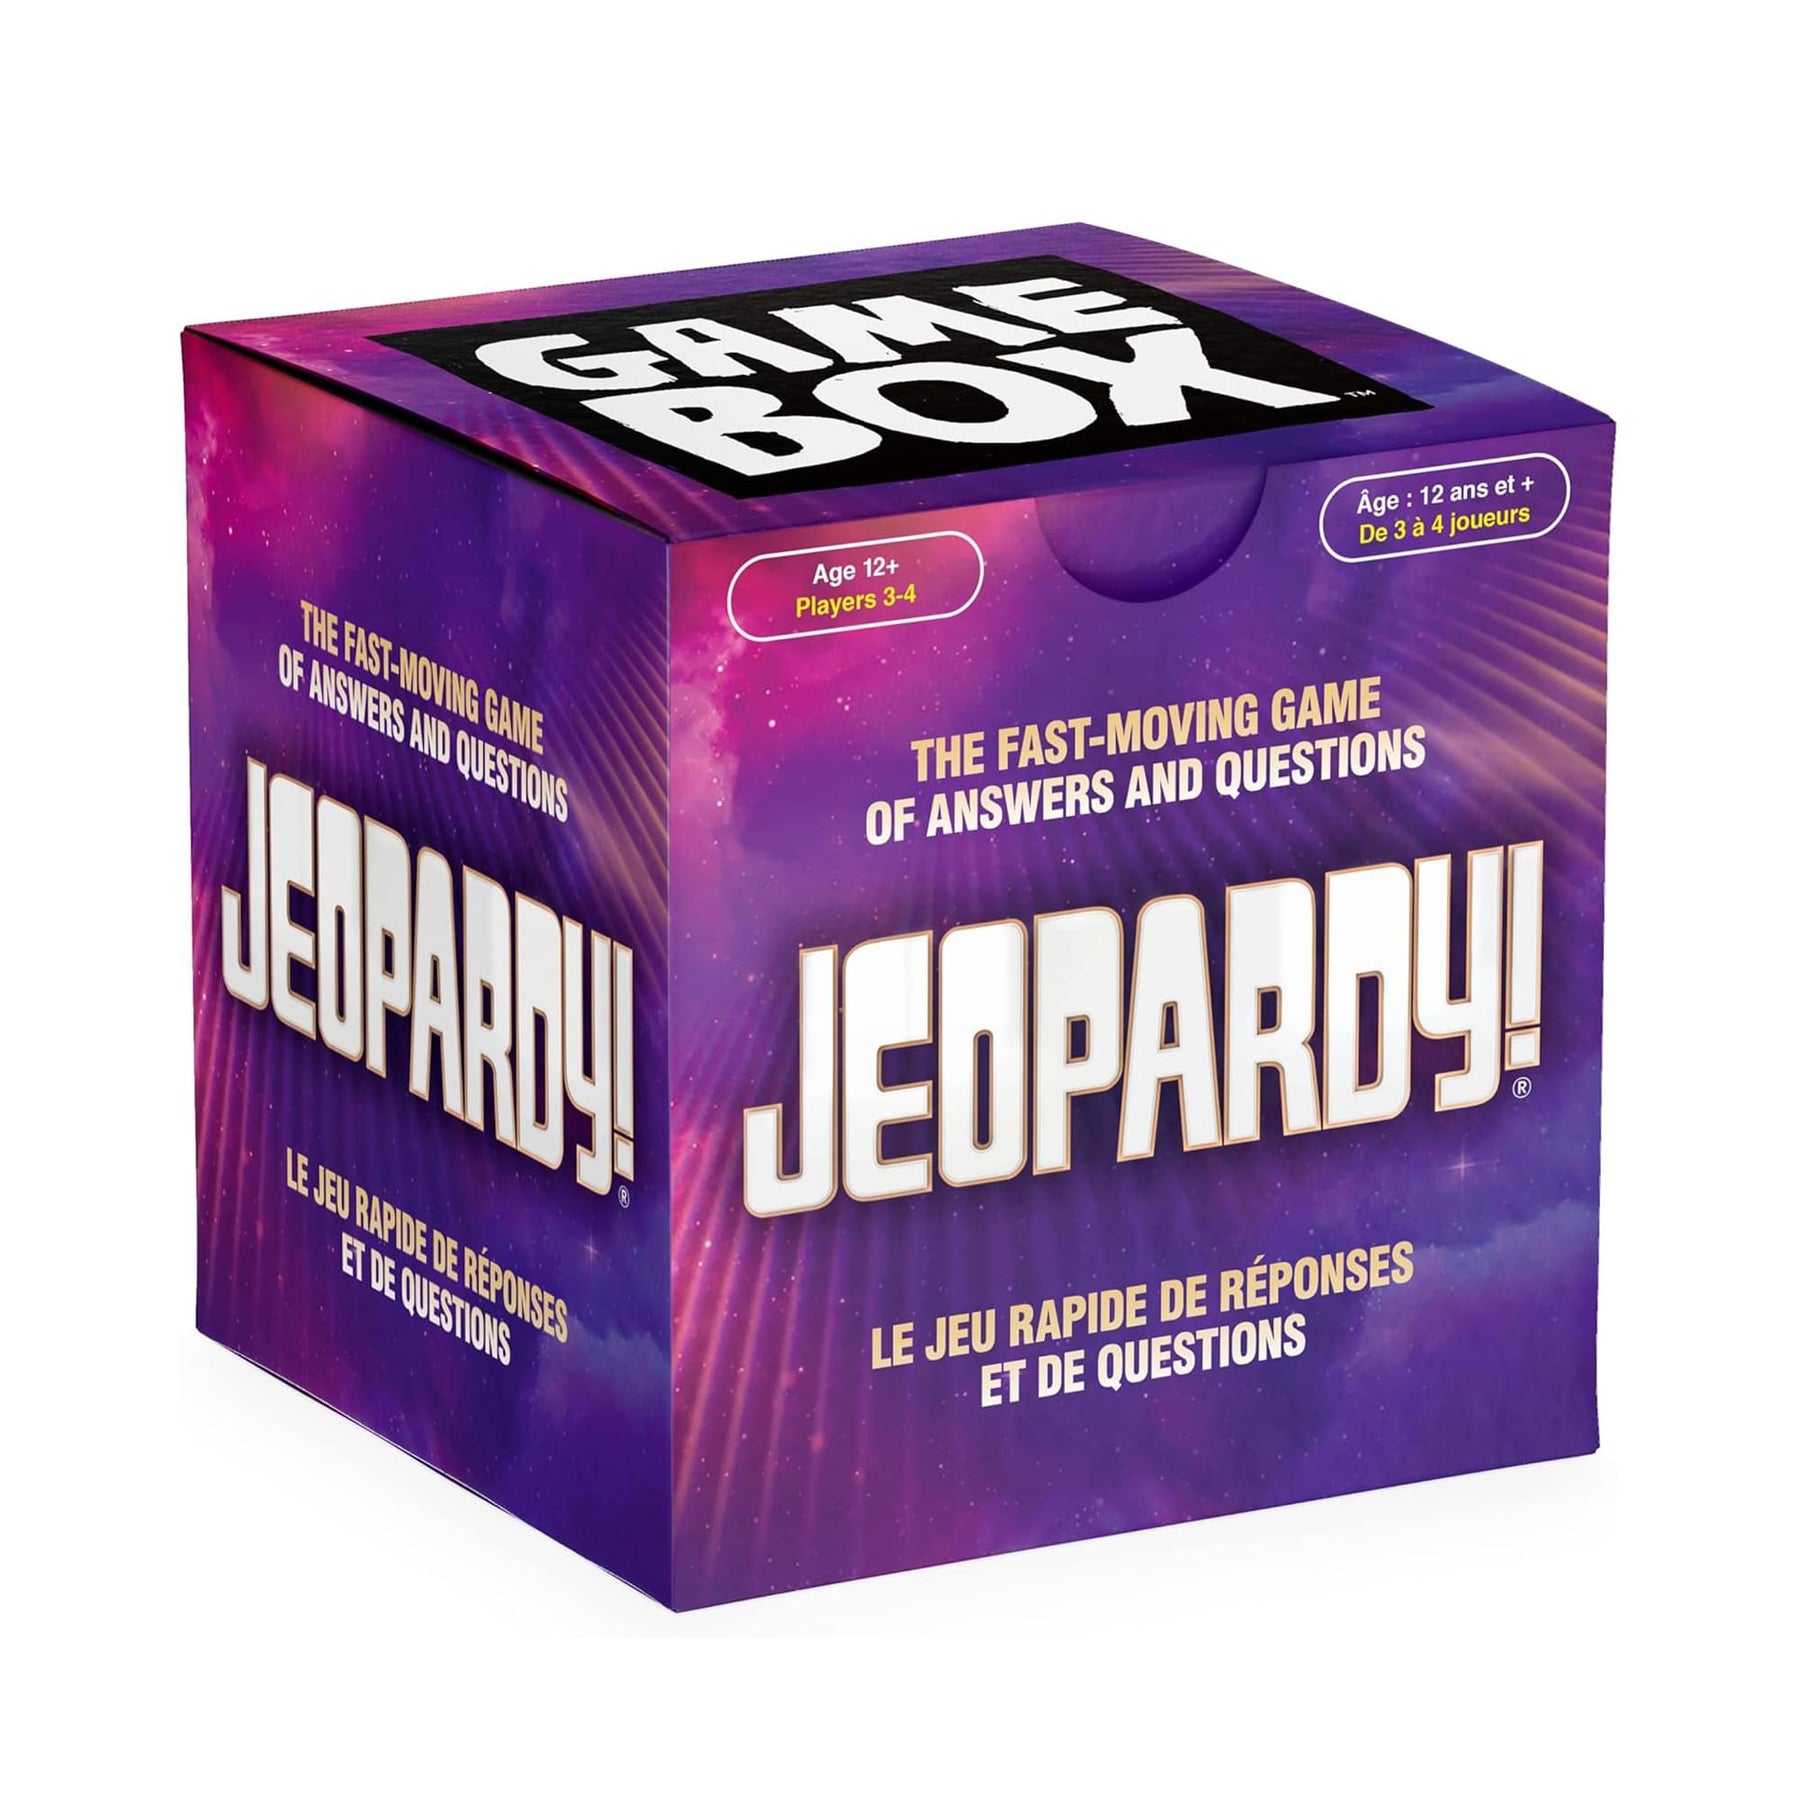 Jeopardy! Family Game Box